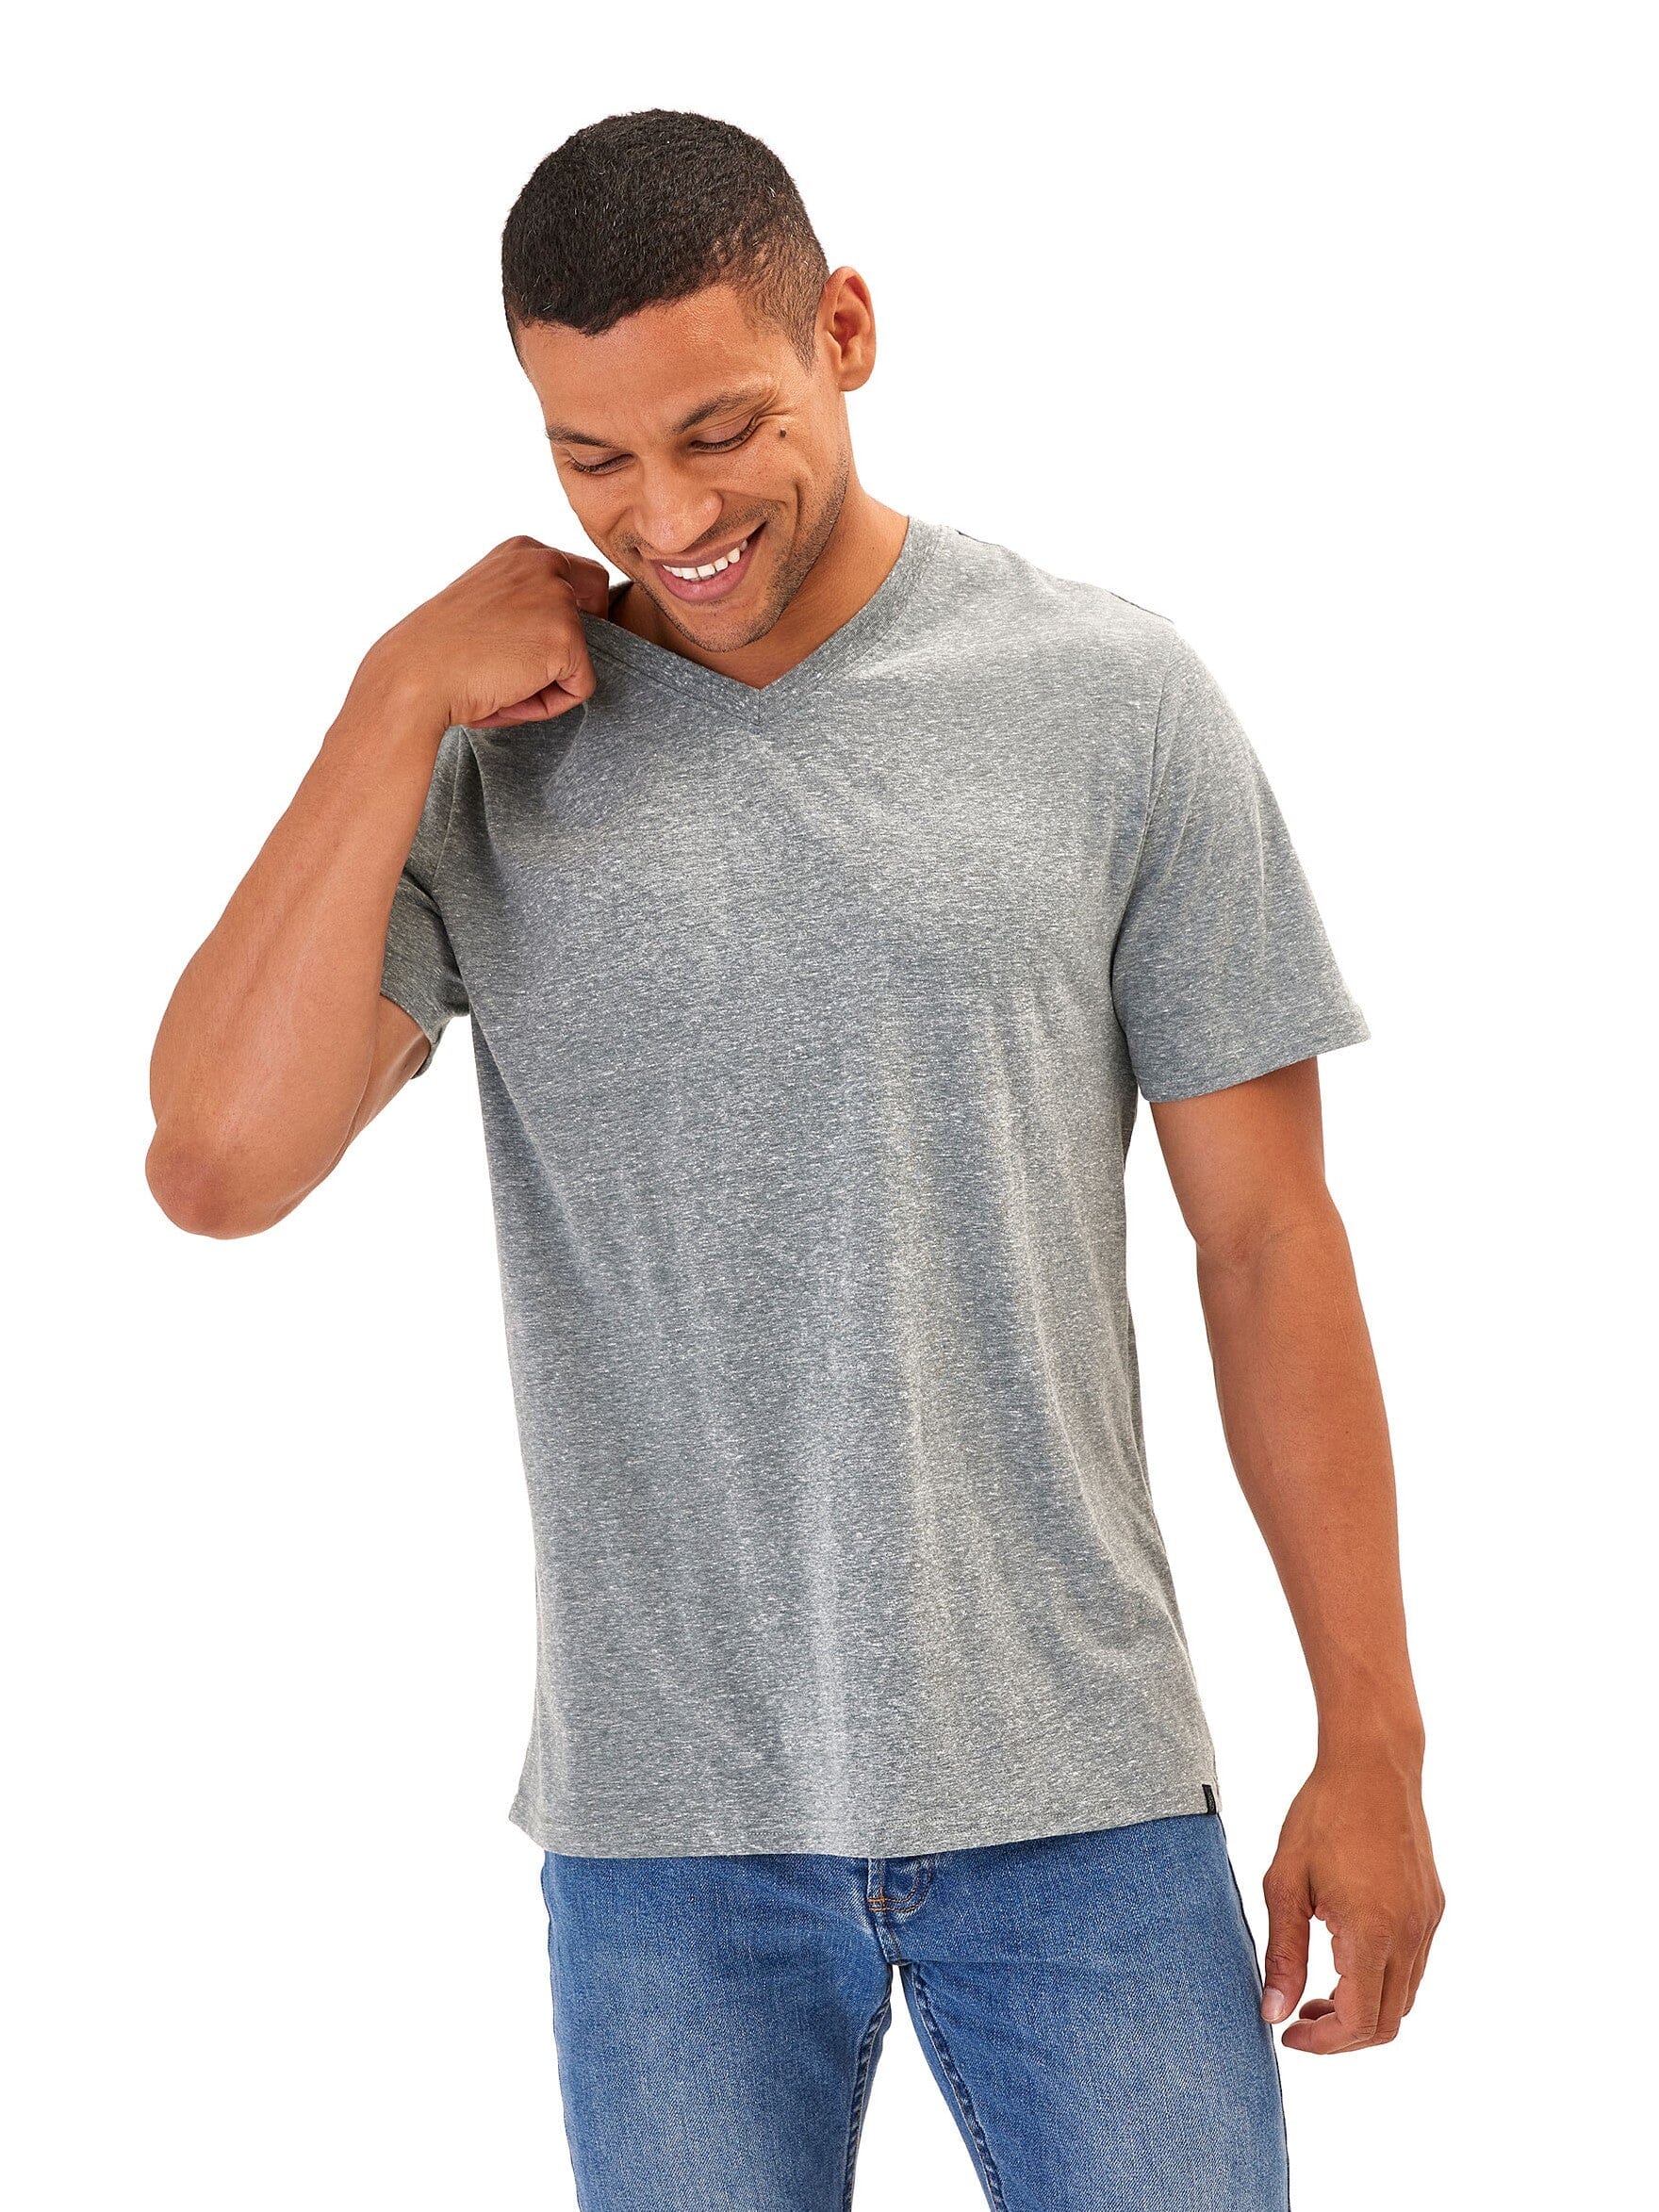 Men's New Arrivals – Threads 4 Thought